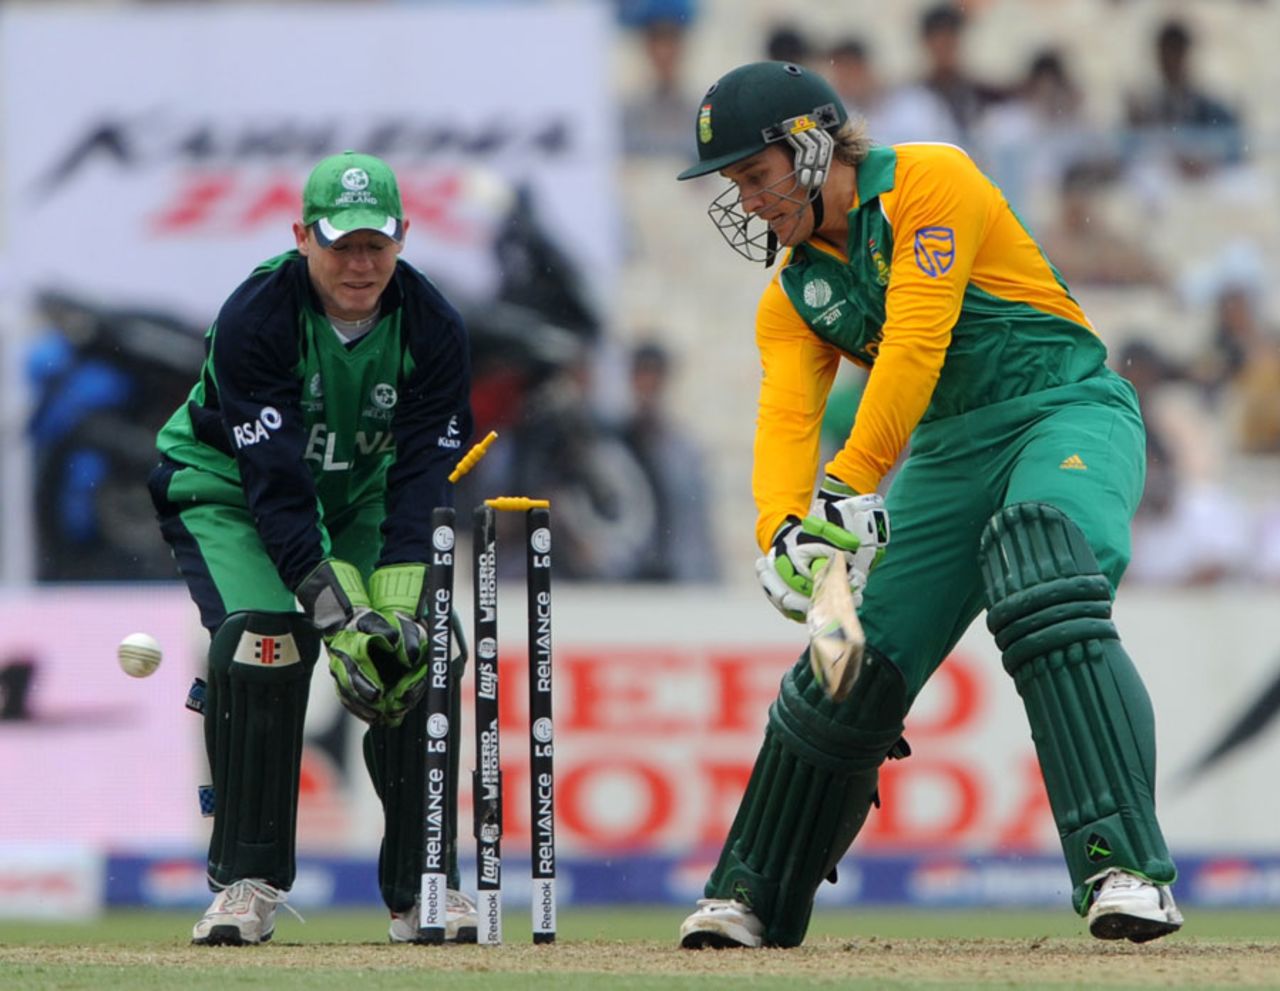 Morne van Wyk was bowled by George Dockrell for 42, Ireland v South Africa, Group B, World Cup, Kolkata, March 15, 2011